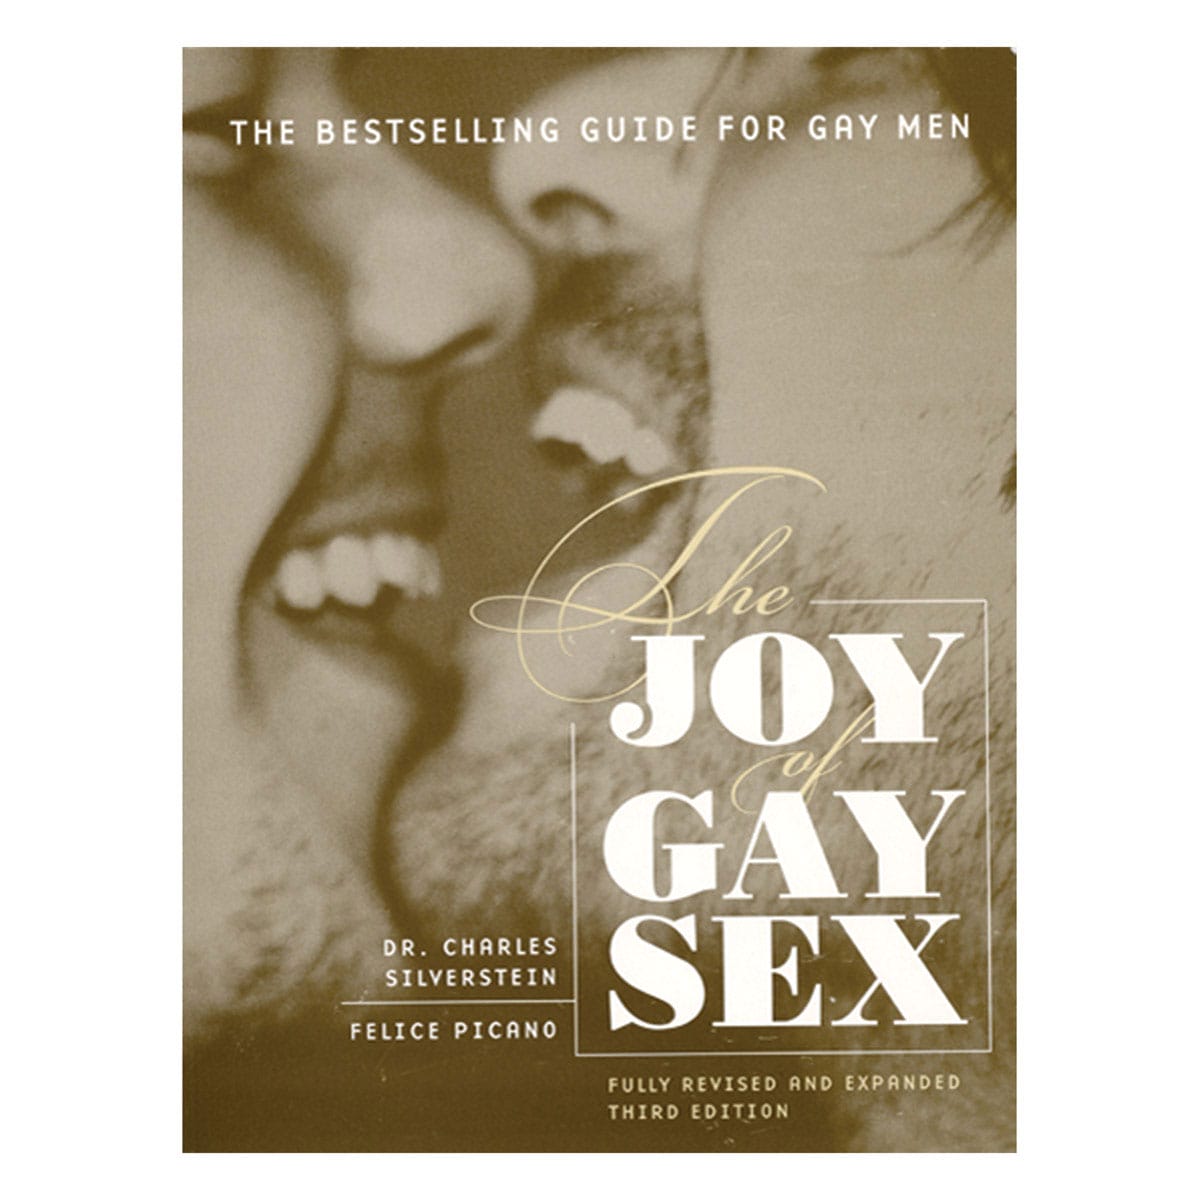 Buy The Bestselling Guide for Gay Men Joy of Gay Sex book for her.